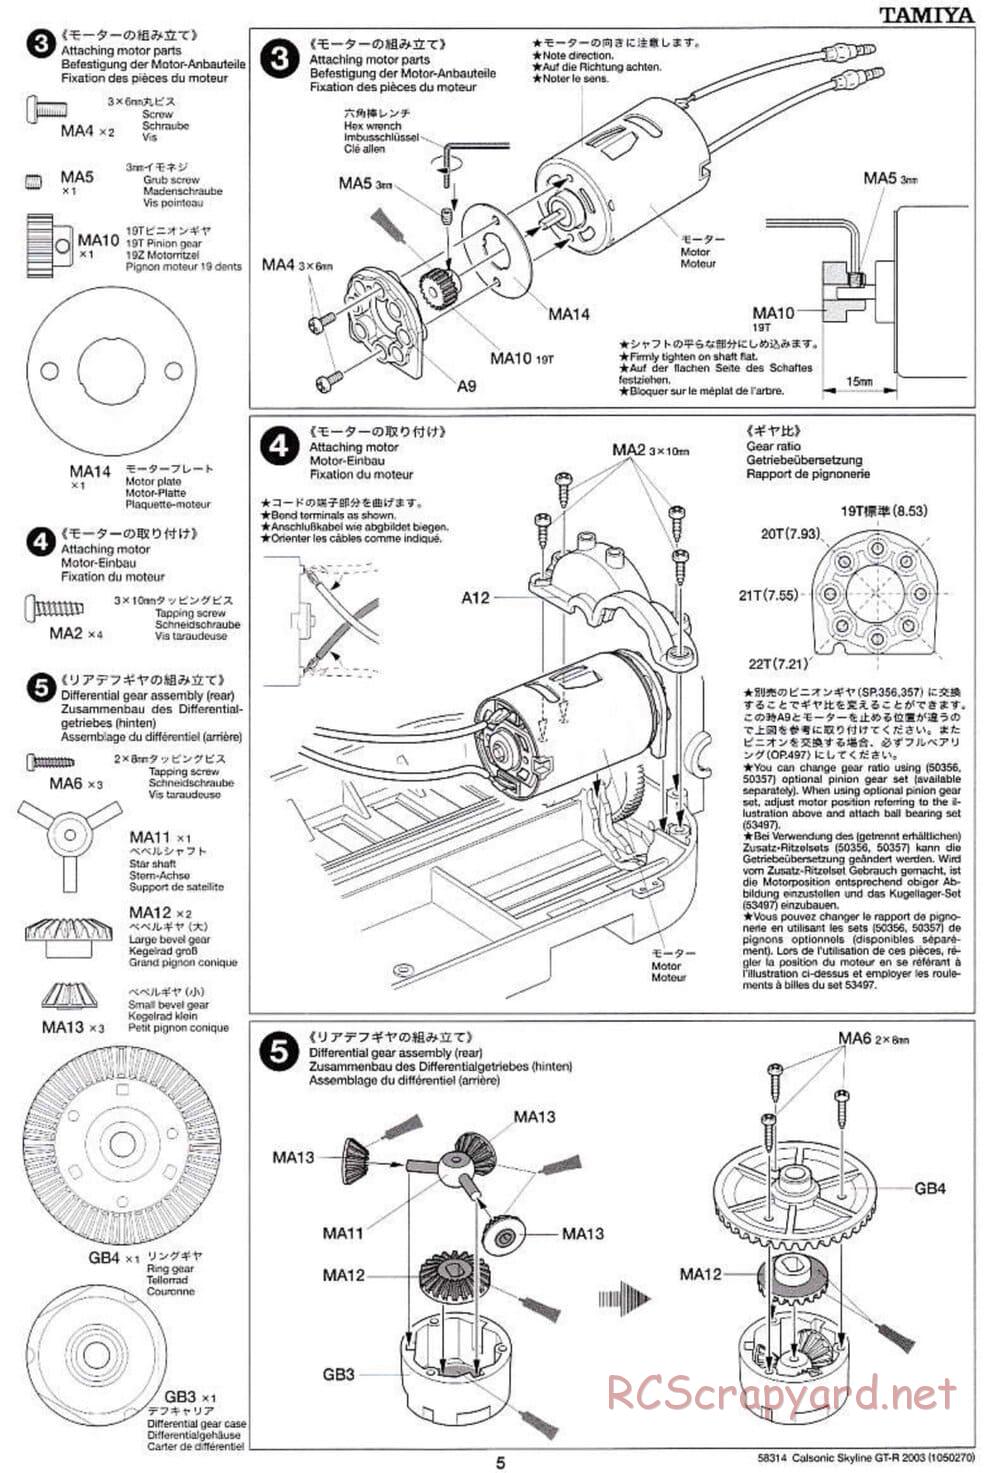 Tamiya - Calsonic Skyline GT-R 2003 - TT-01 Chassis - Manual - Page 5